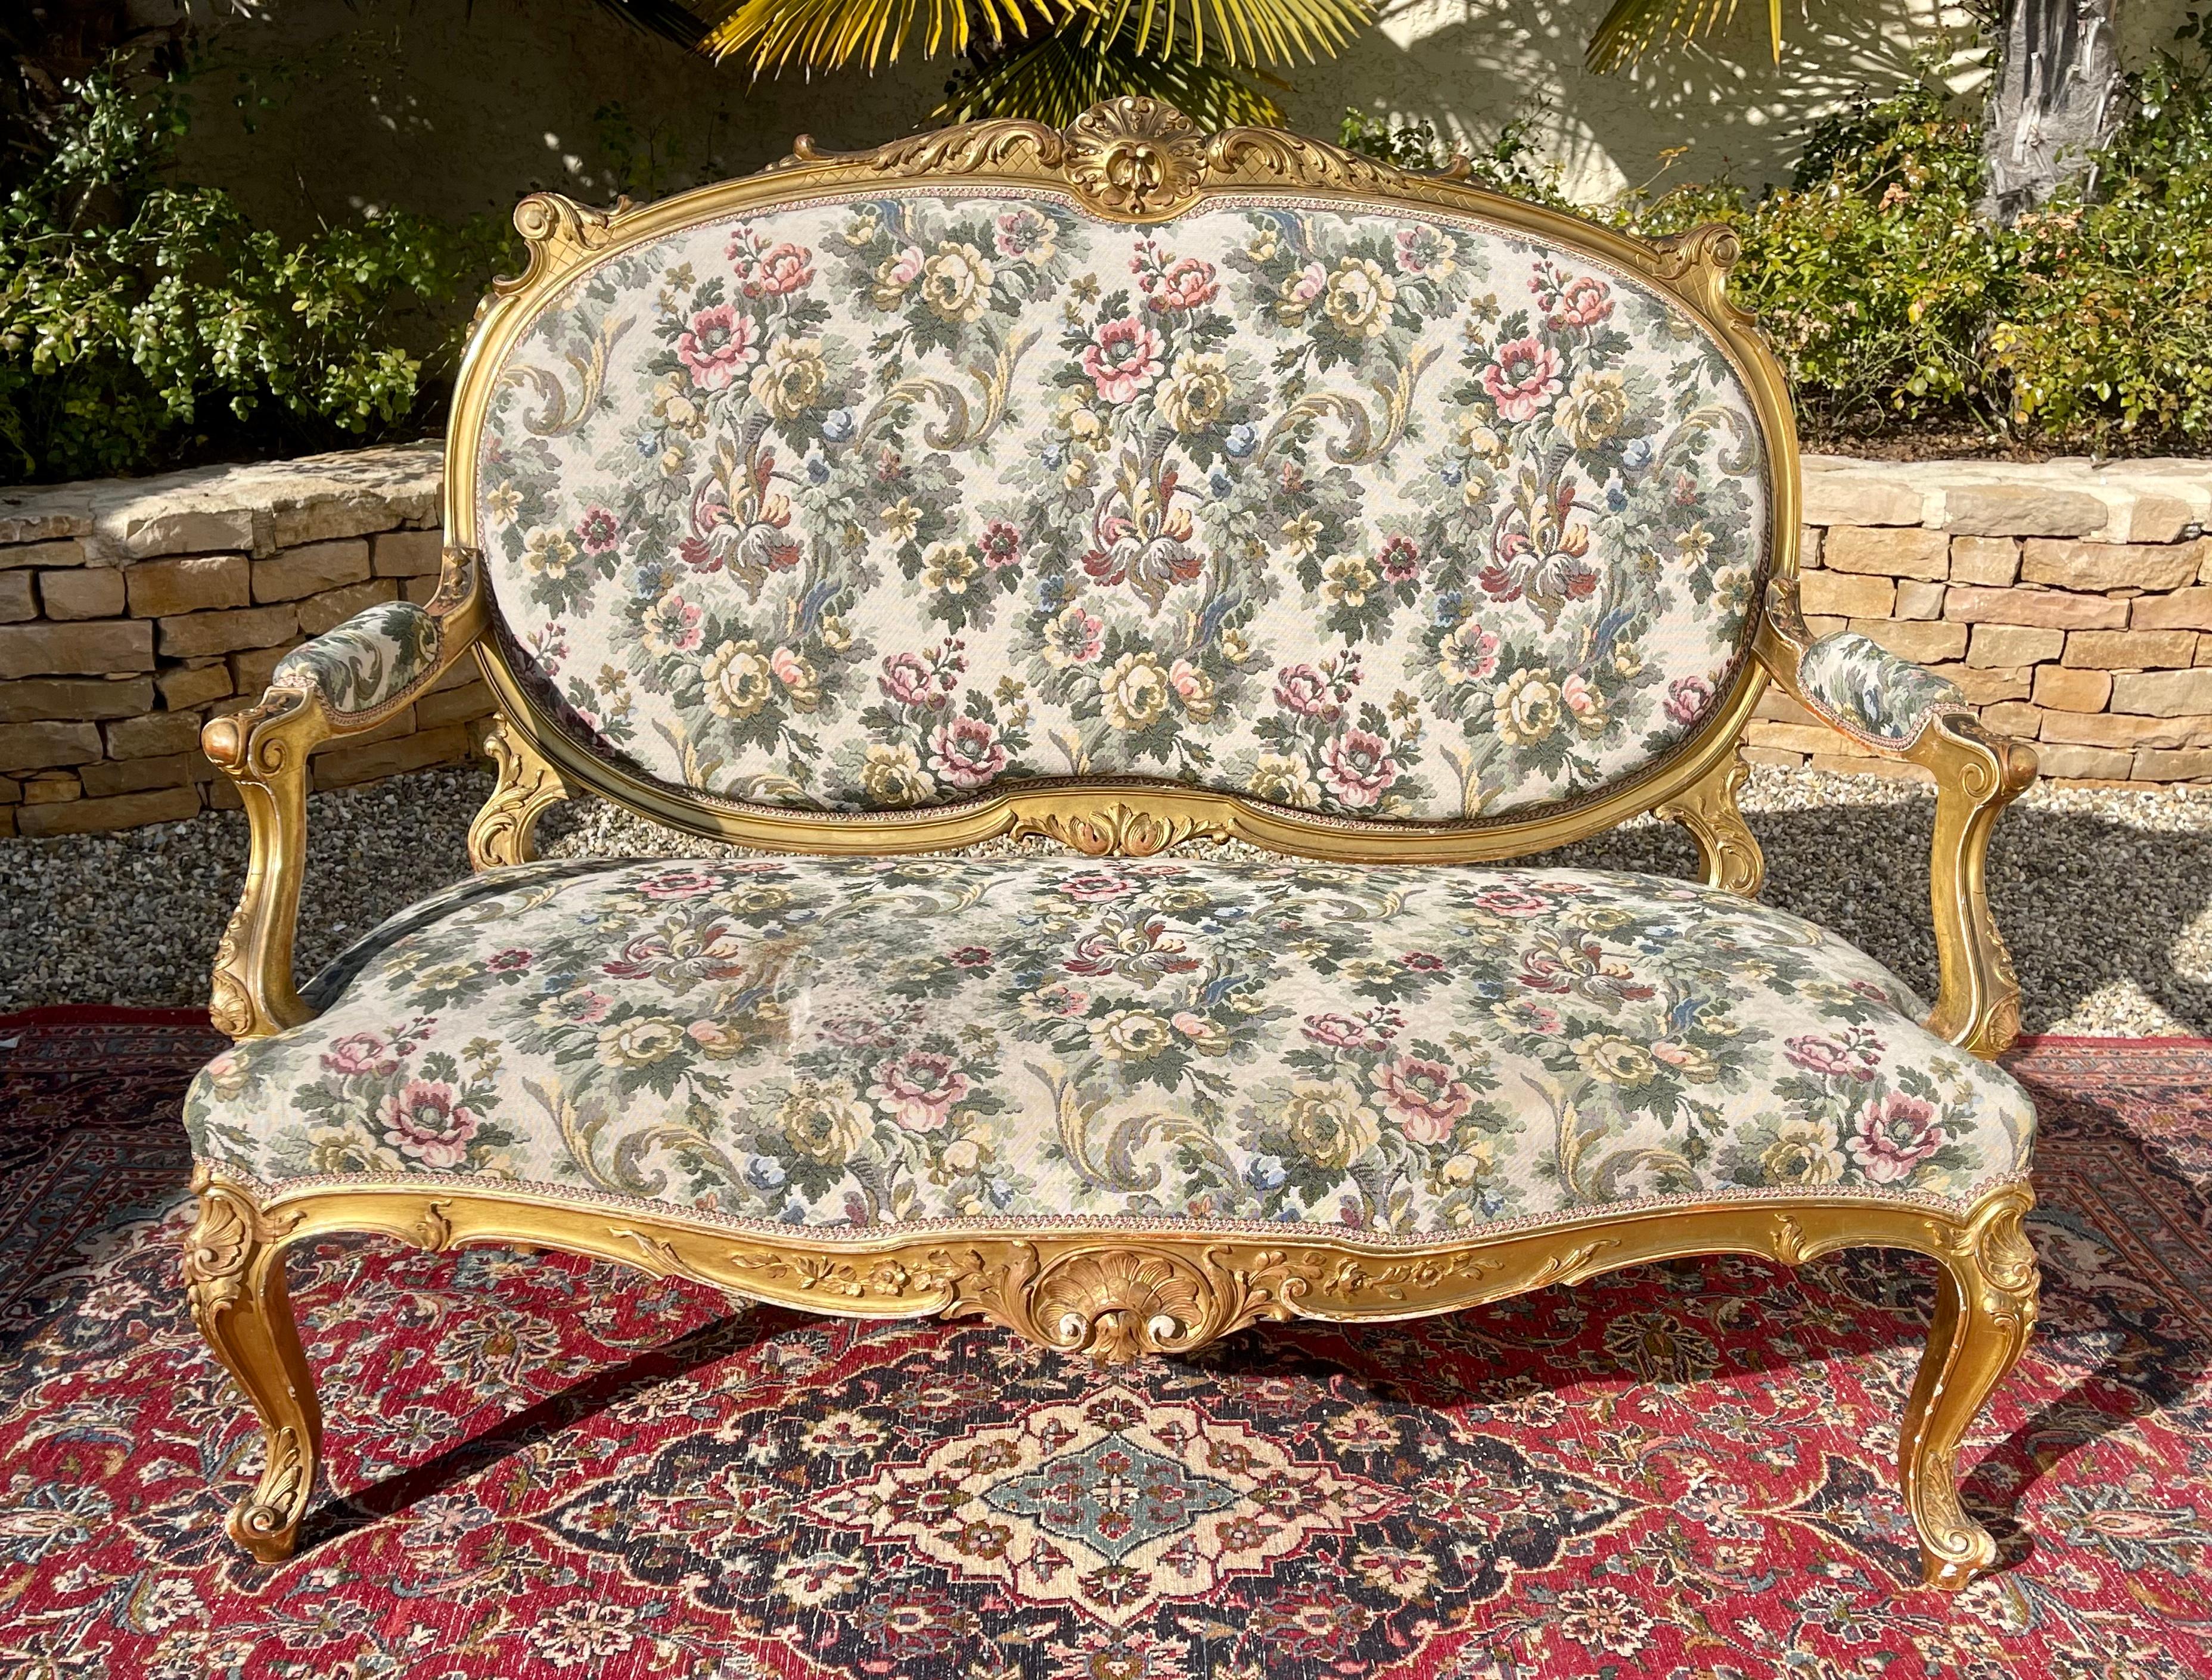 Superb living room in gilded wood in Louis XV style composed of 7 pieces: sofa, 2 armchairs and 4 chairs. The whole is covered with a floral tapestry. 2 chairs are upholstered with a different fabric. Very nice model in good